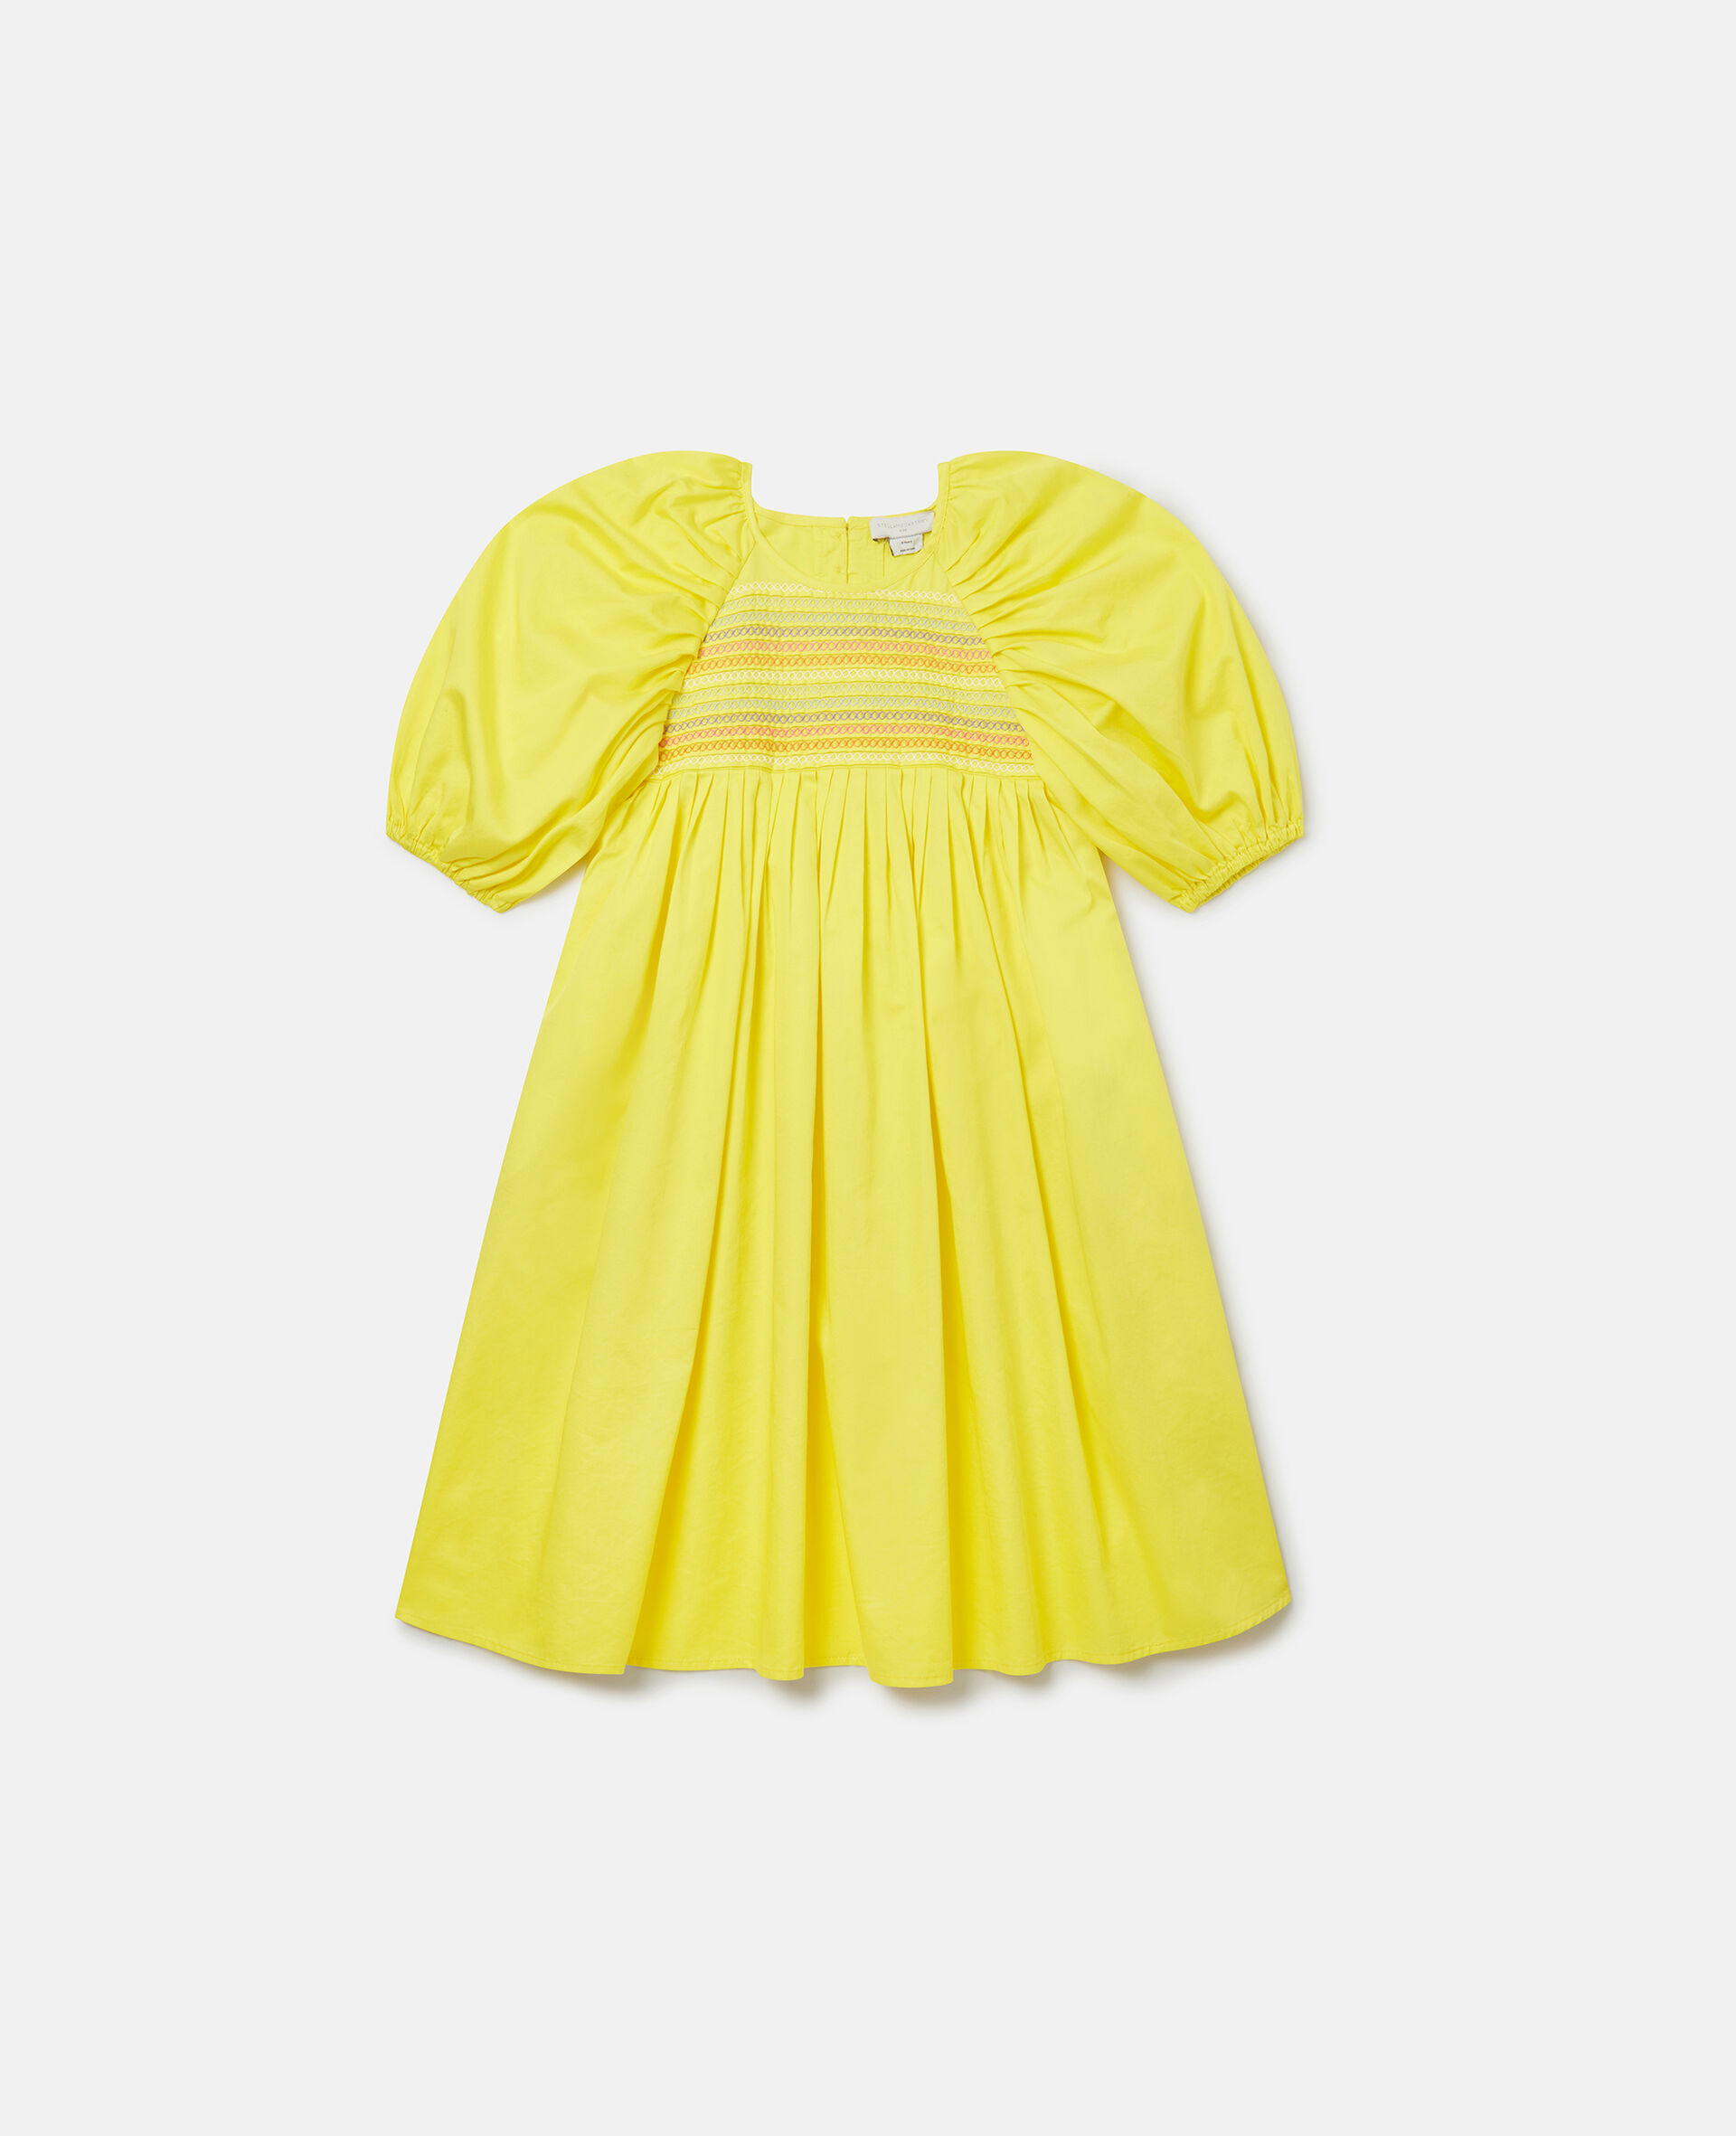 Flower Line Embroidery Smock Dress-Yellow-large image number 0